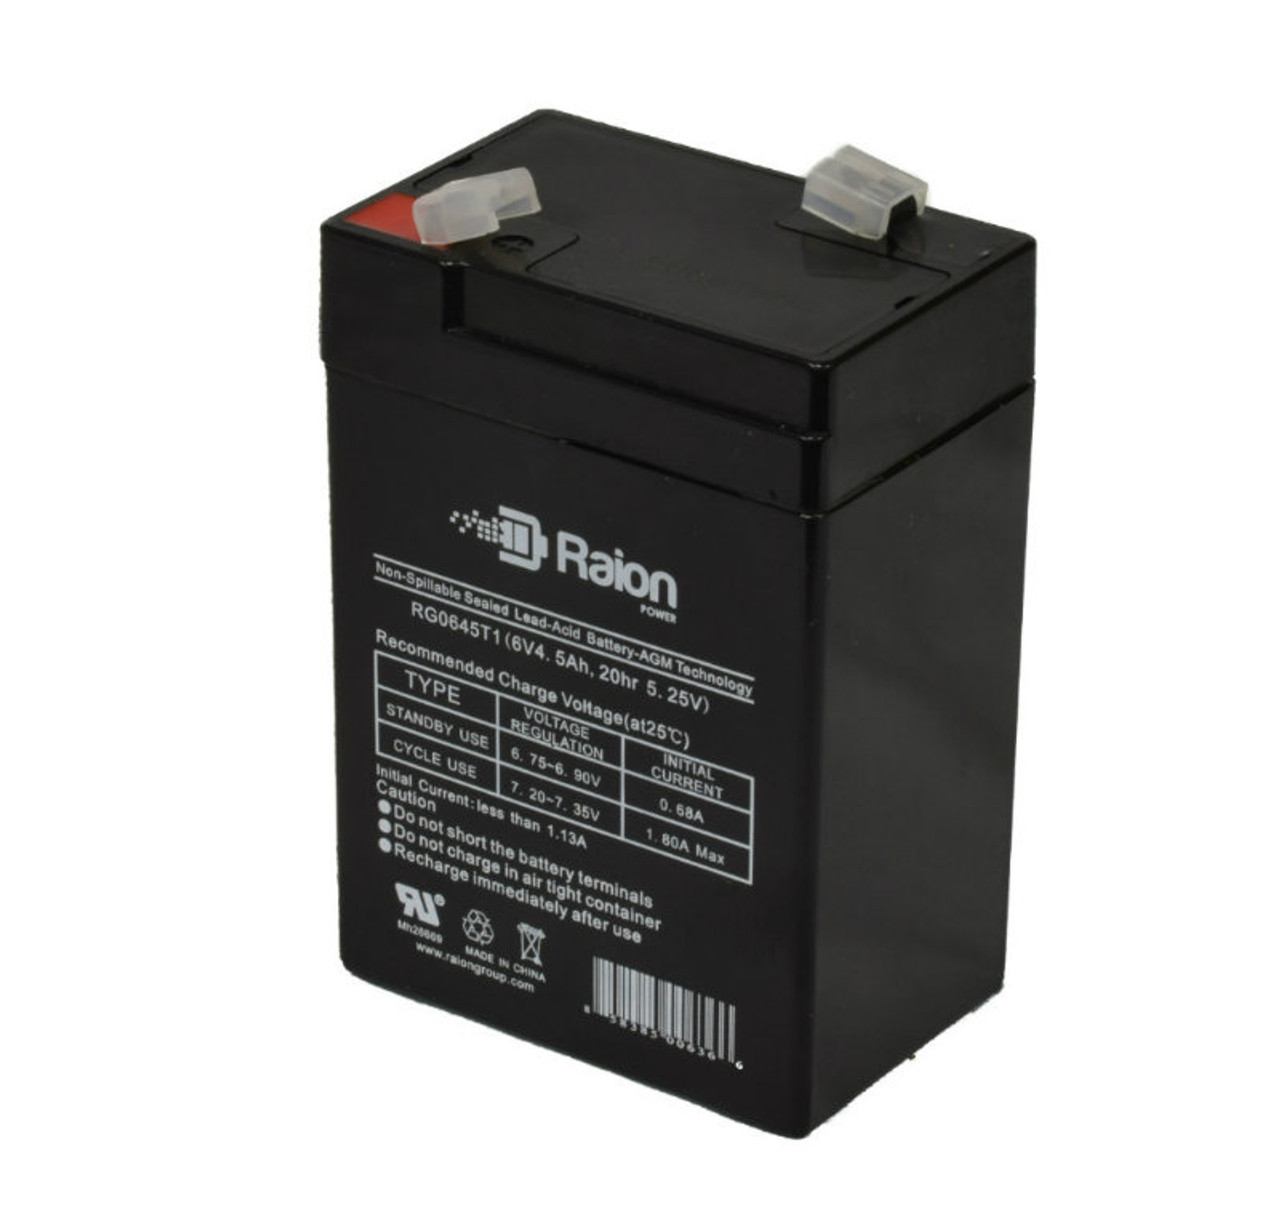 Raion Power RG0645T1 6V 4.5Ah Replacement Battery Cartridge for VCELL 6VC4.5